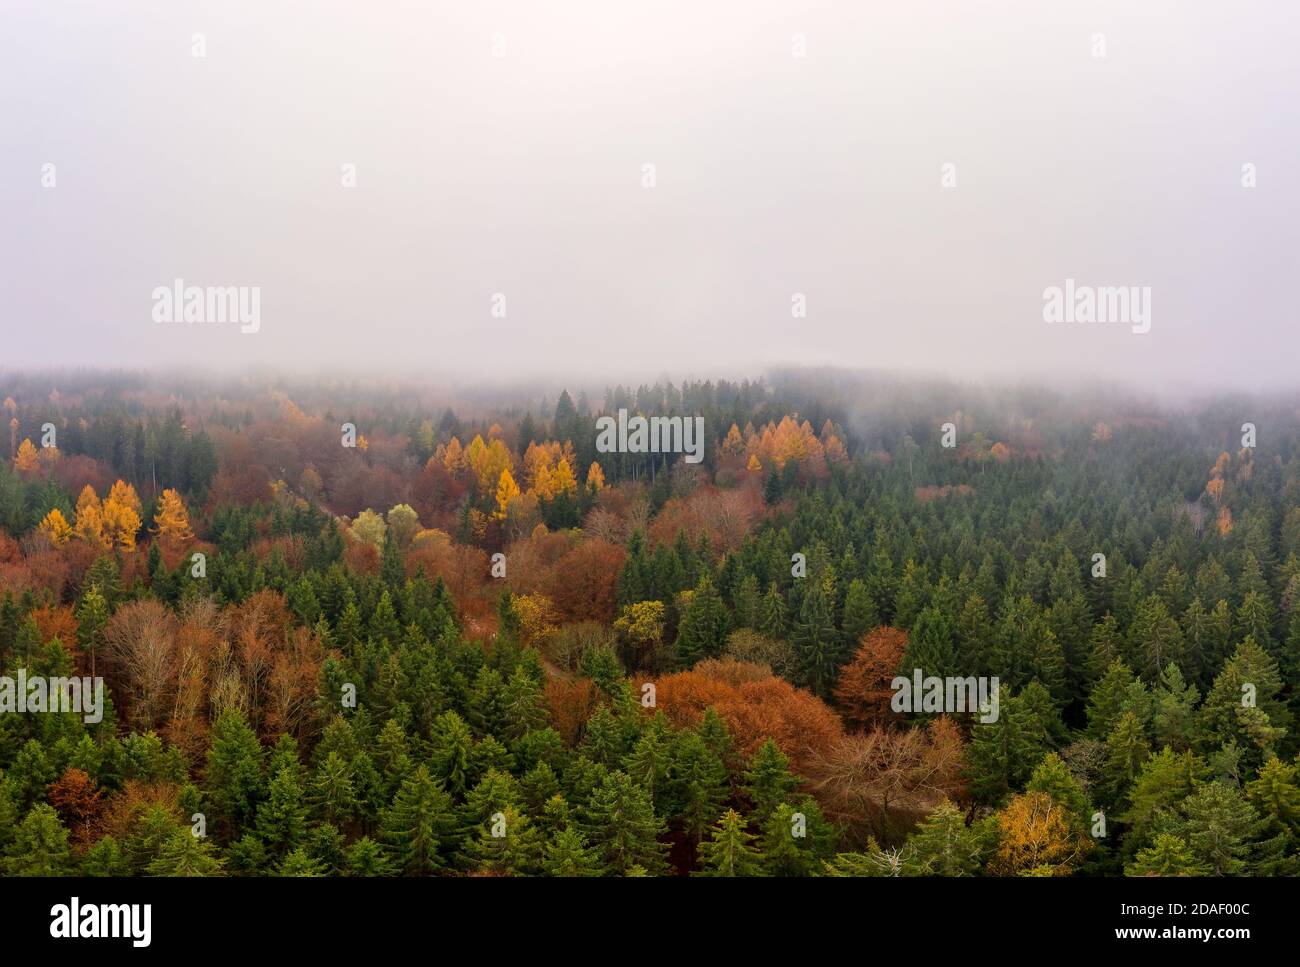 Wide colorful forest aerial landscape from above at a foggy autumn day with copyspace at the top of the image. Stock Photo